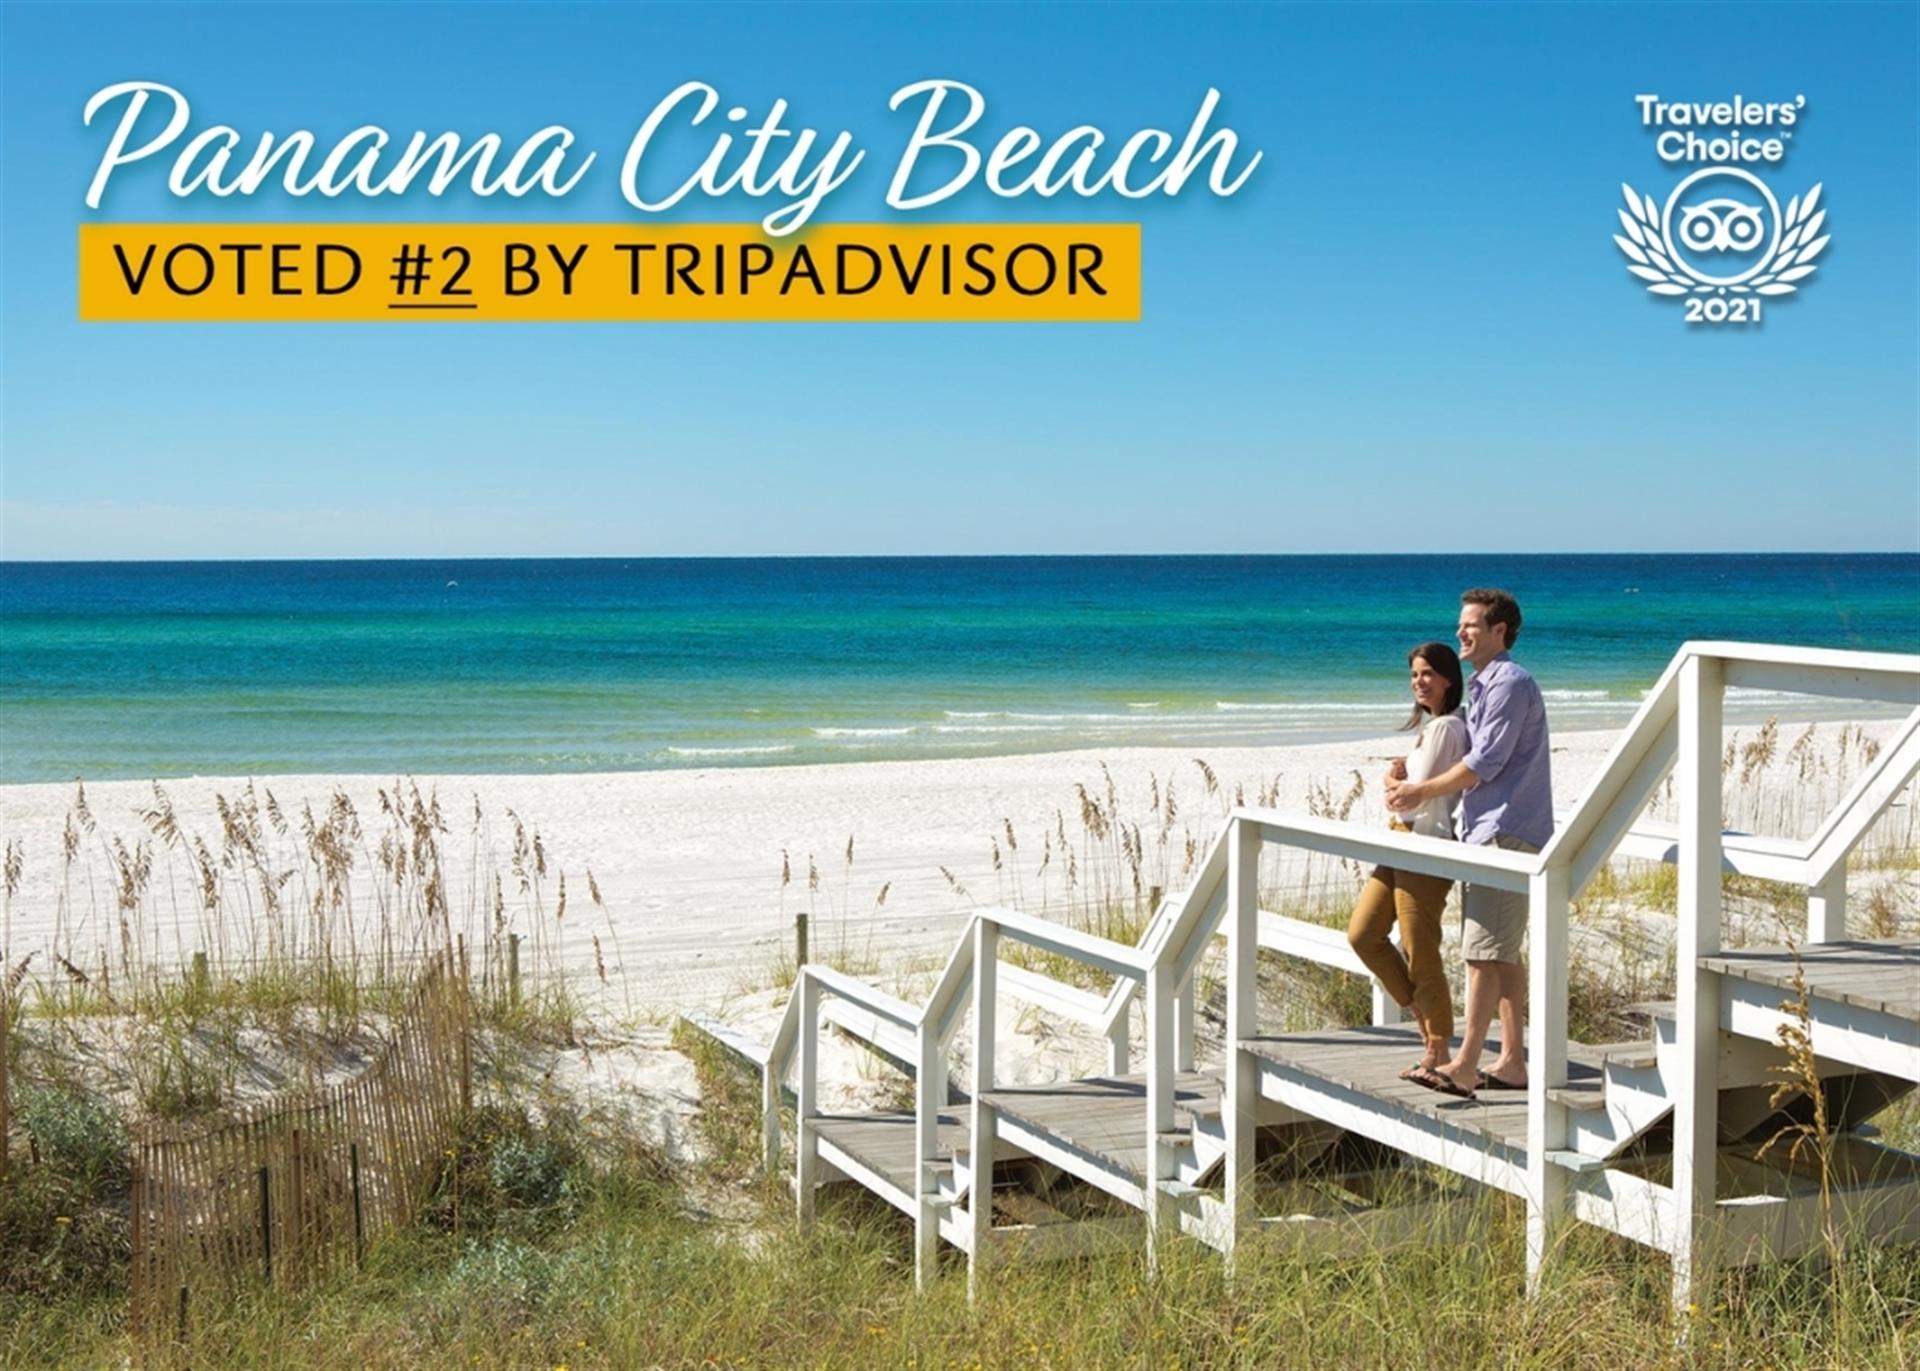 Panama City Beach Voted Number 2 in the World by Tripadvisor 2021